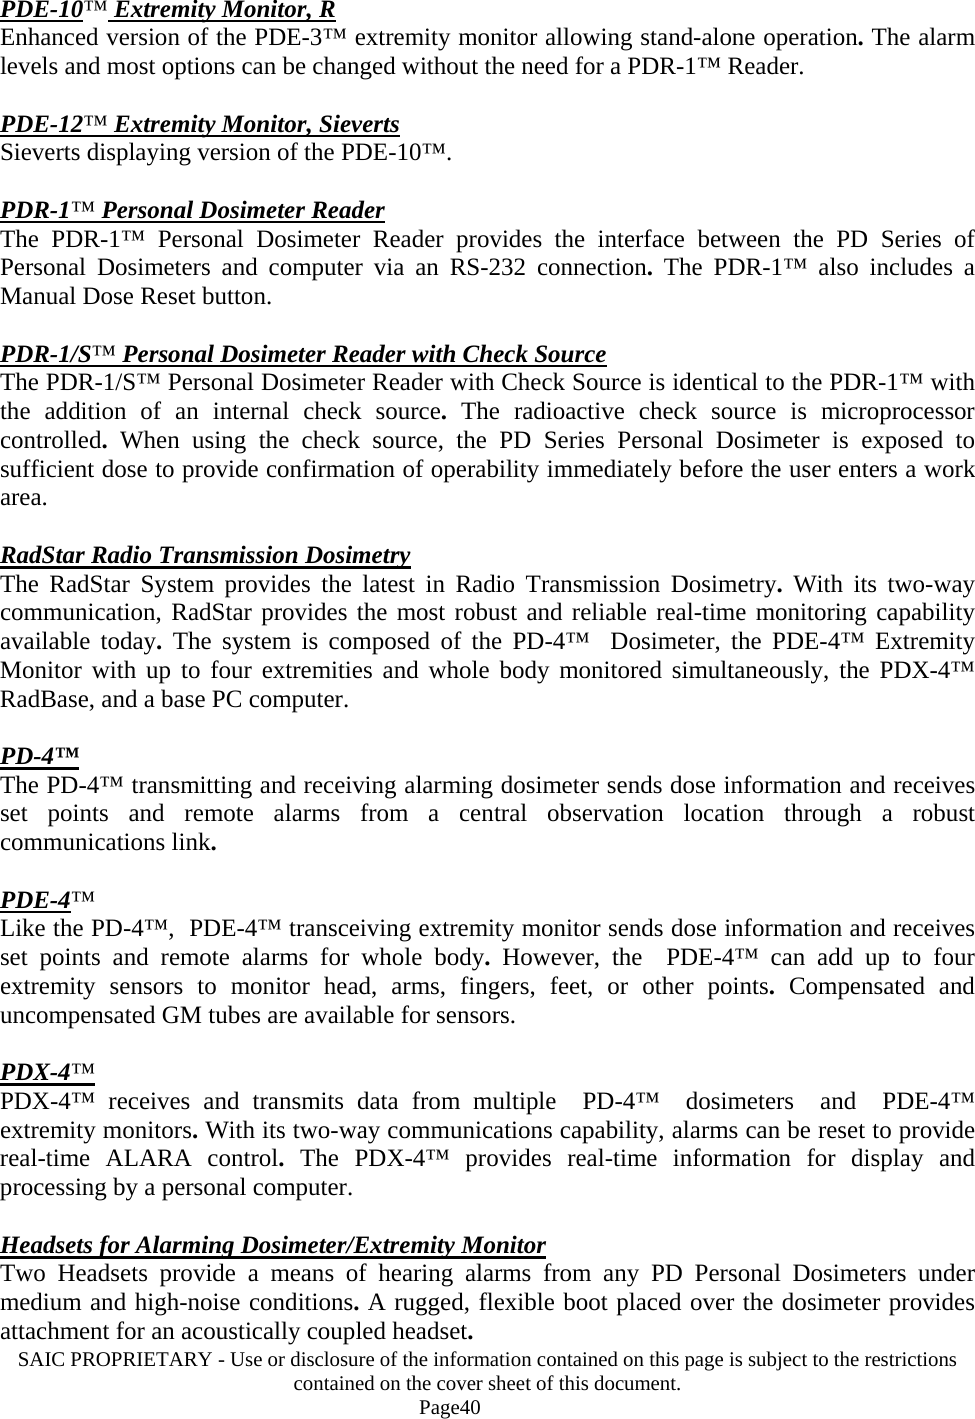 SAIC PROPRIETARY - Use or disclosure of the information contained on this page is subject to the restrictions contained on the cover sheet of this document.    Page40 PDE-10™ Extremity Monitor, R Enhanced version of the PDE-3™ extremity monitor allowing stand-alone operation. The alarm levels and most options can be changed without the need for a PDR-1™ Reader.  PDE-12™ Extremity Monitor, Sieverts Sieverts displaying version of the PDE-10™.  PDR-1™ Personal Dosimeter Reader The PDR-1™ Personal Dosimeter Reader provides the interface between the PD Series of Personal Dosimeters and computer via an RS-232 connection.  The PDR-1™ also includes a Manual Dose Reset button.  PDR-1/S™ Personal Dosimeter Reader with Check Source The PDR-1/S™ Personal Dosimeter Reader with Check Source is identical to the PDR-1™ with the addition of an internal check source.  The radioactive check source is microprocessor controlled.  When using the check source, the PD Series Personal Dosimeter is exposed to sufficient dose to provide confirmation of operability immediately before the user enters a work area.  RadStar Radio Transmission Dosimetry The RadStar System provides the latest in Radio Transmission Dosimetry.  With its two-way communication, RadStar provides the most robust and reliable real-time monitoring capability available today. The system is composed of the PD-4™  Dosimeter, the PDE-4™ Extremity Monitor with up to four extremities and whole body monitored simultaneously, the PDX-4™ RadBase, and a base PC computer.  PD-4™ The PD-4™ transmitting and receiving alarming dosimeter sends dose information and receives set points and remote alarms from a central observation location through a robust communications link.   PDE-4™ Like the PD-4™,  PDE-4™ transceiving extremity monitor sends dose information and receives set points and remote alarms for whole body.  However, the  PDE-4™ can add up to four extremity sensors to monitor head, arms, fingers, feet, or other points.  Compensated and uncompensated GM tubes are available for sensors.  PDX-4™ PDX-4™ receives and transmits data from multiple  PD-4™  dosimeters  and  PDE-4™ extremity monitors. With its two-way communications capability, alarms can be reset to provide real-time ALARA control.  The PDX-4™ provides real-time information for display and processing by a personal computer.  Headsets for Alarming Dosimeter/Extremity Monitor Two Headsets provide a means of hearing alarms from any PD Personal Dosimeters under medium and high-noise conditions. A rugged, flexible boot placed over the dosimeter provides attachment for an acoustically coupled headset.  